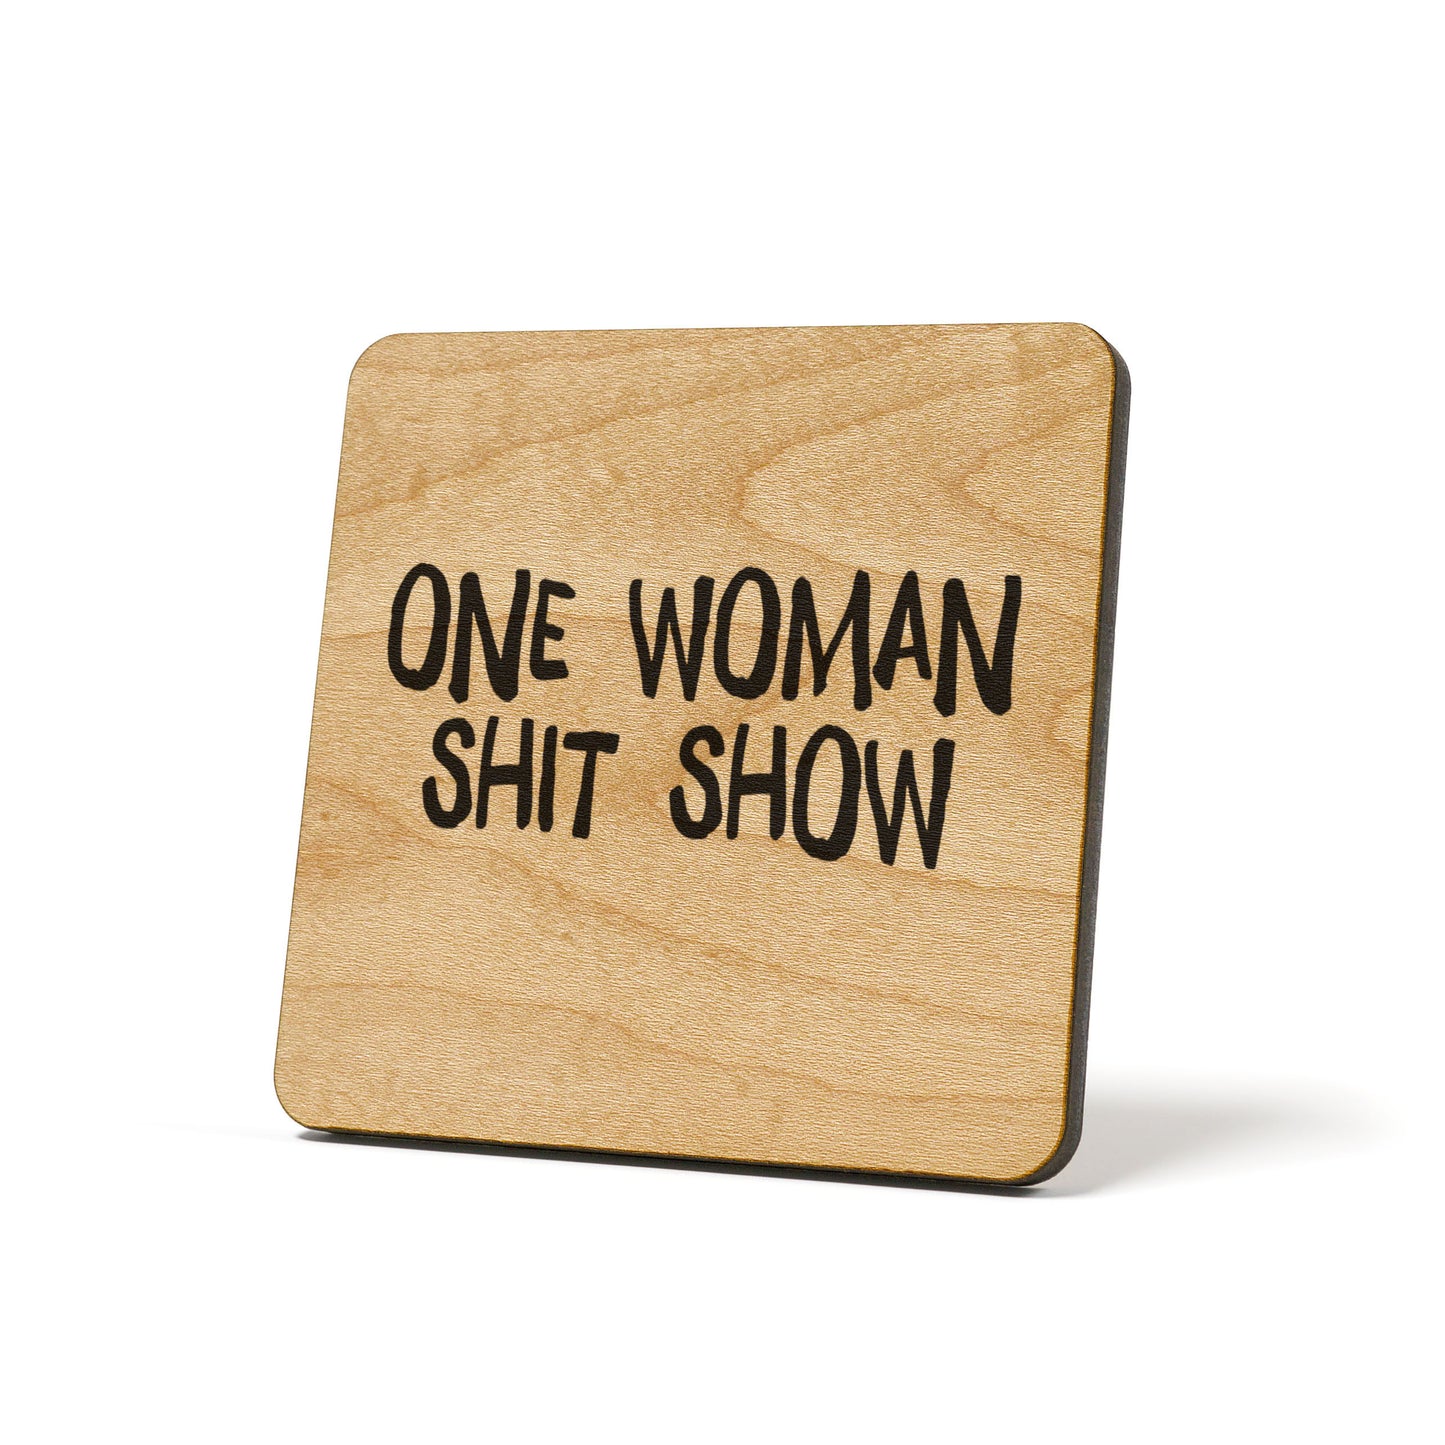 One Woman Shit Show Quote Coaster